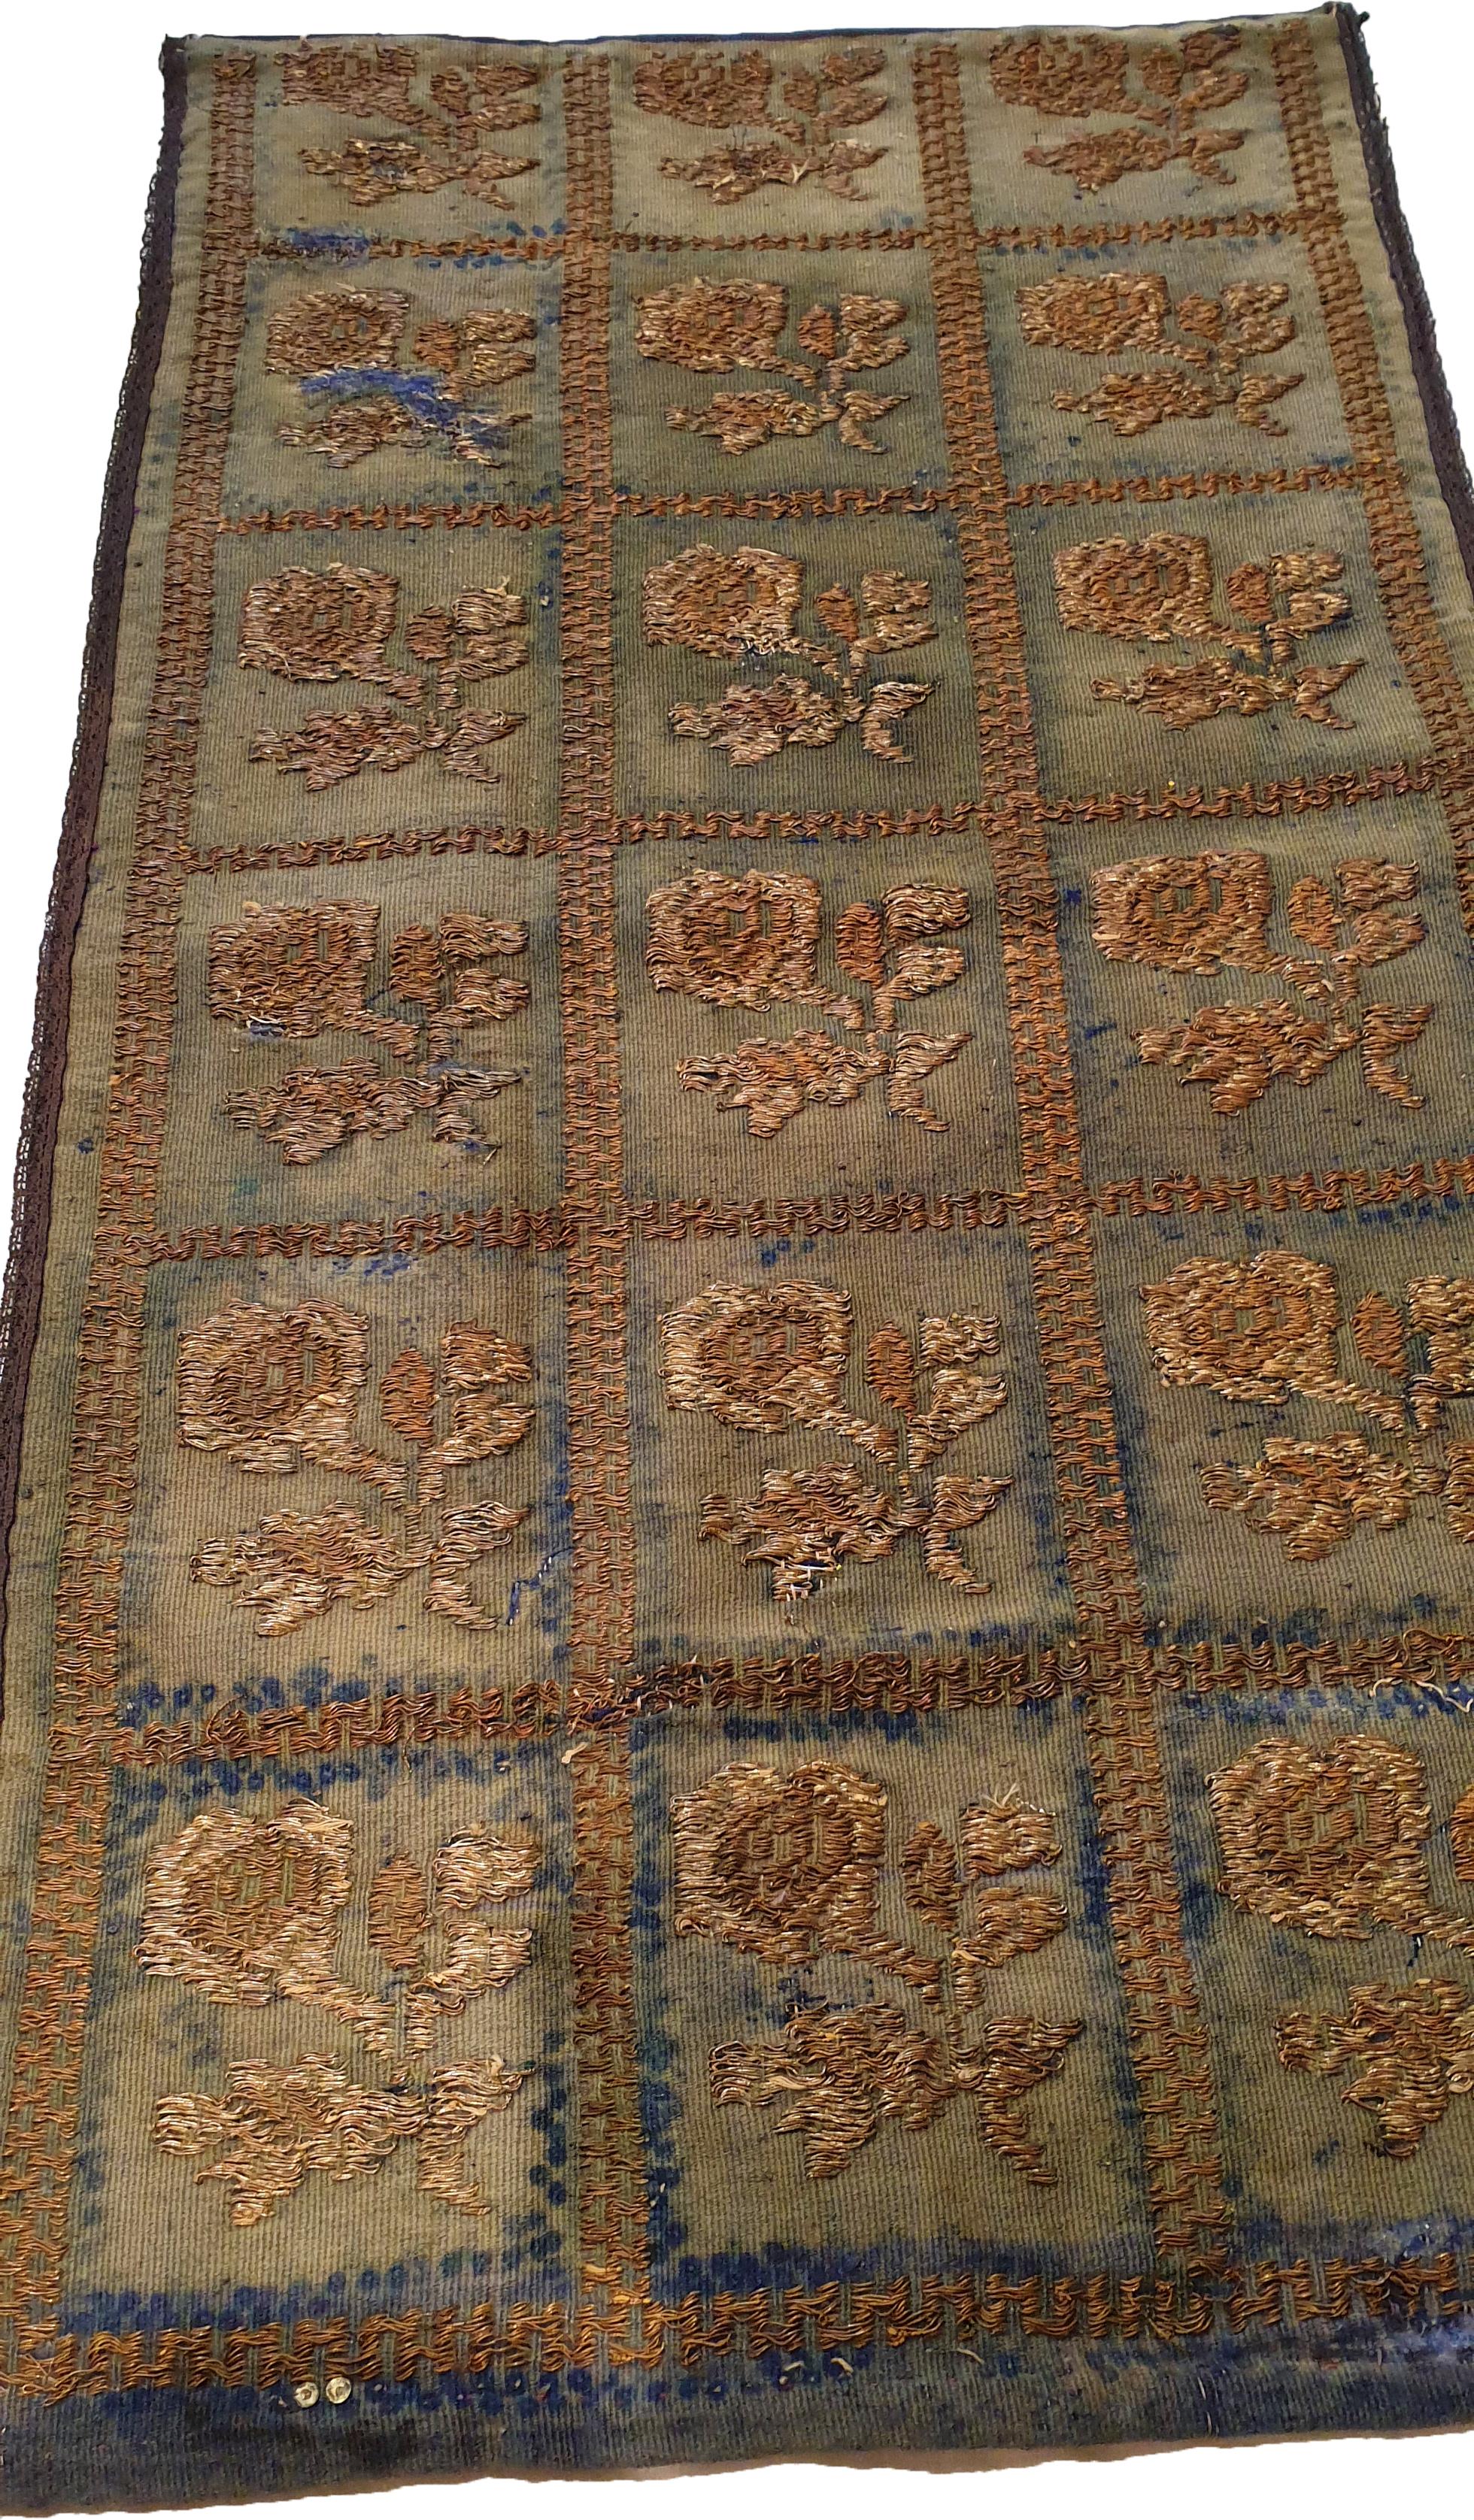 Suzani 715 - Mid-19th Century Ottoman Embroidery For Sale